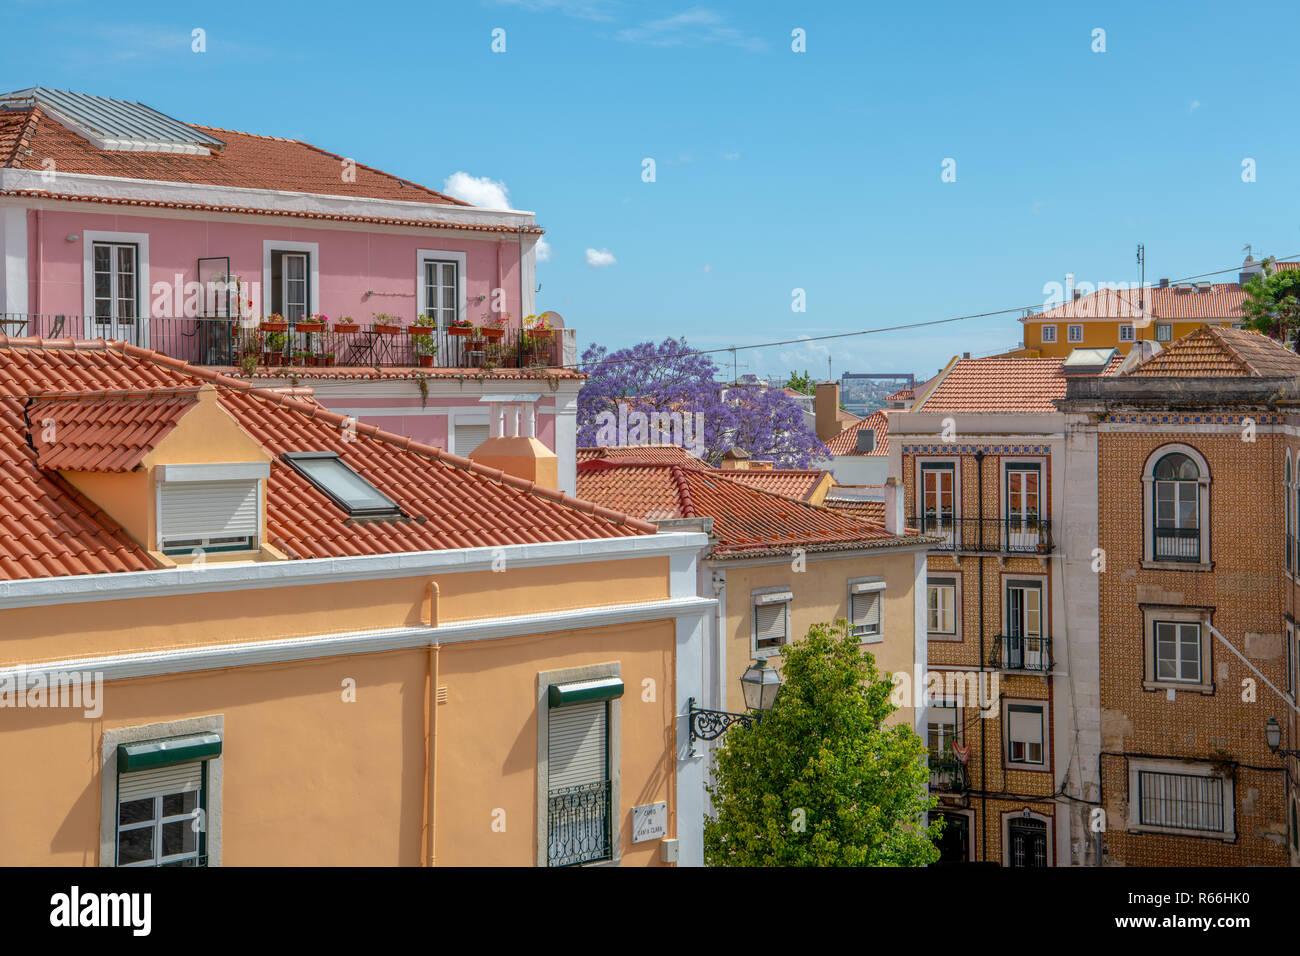 Colorful buildings with red tile roofs in the Alfama district of Lisbon, Portugal Stock Photo